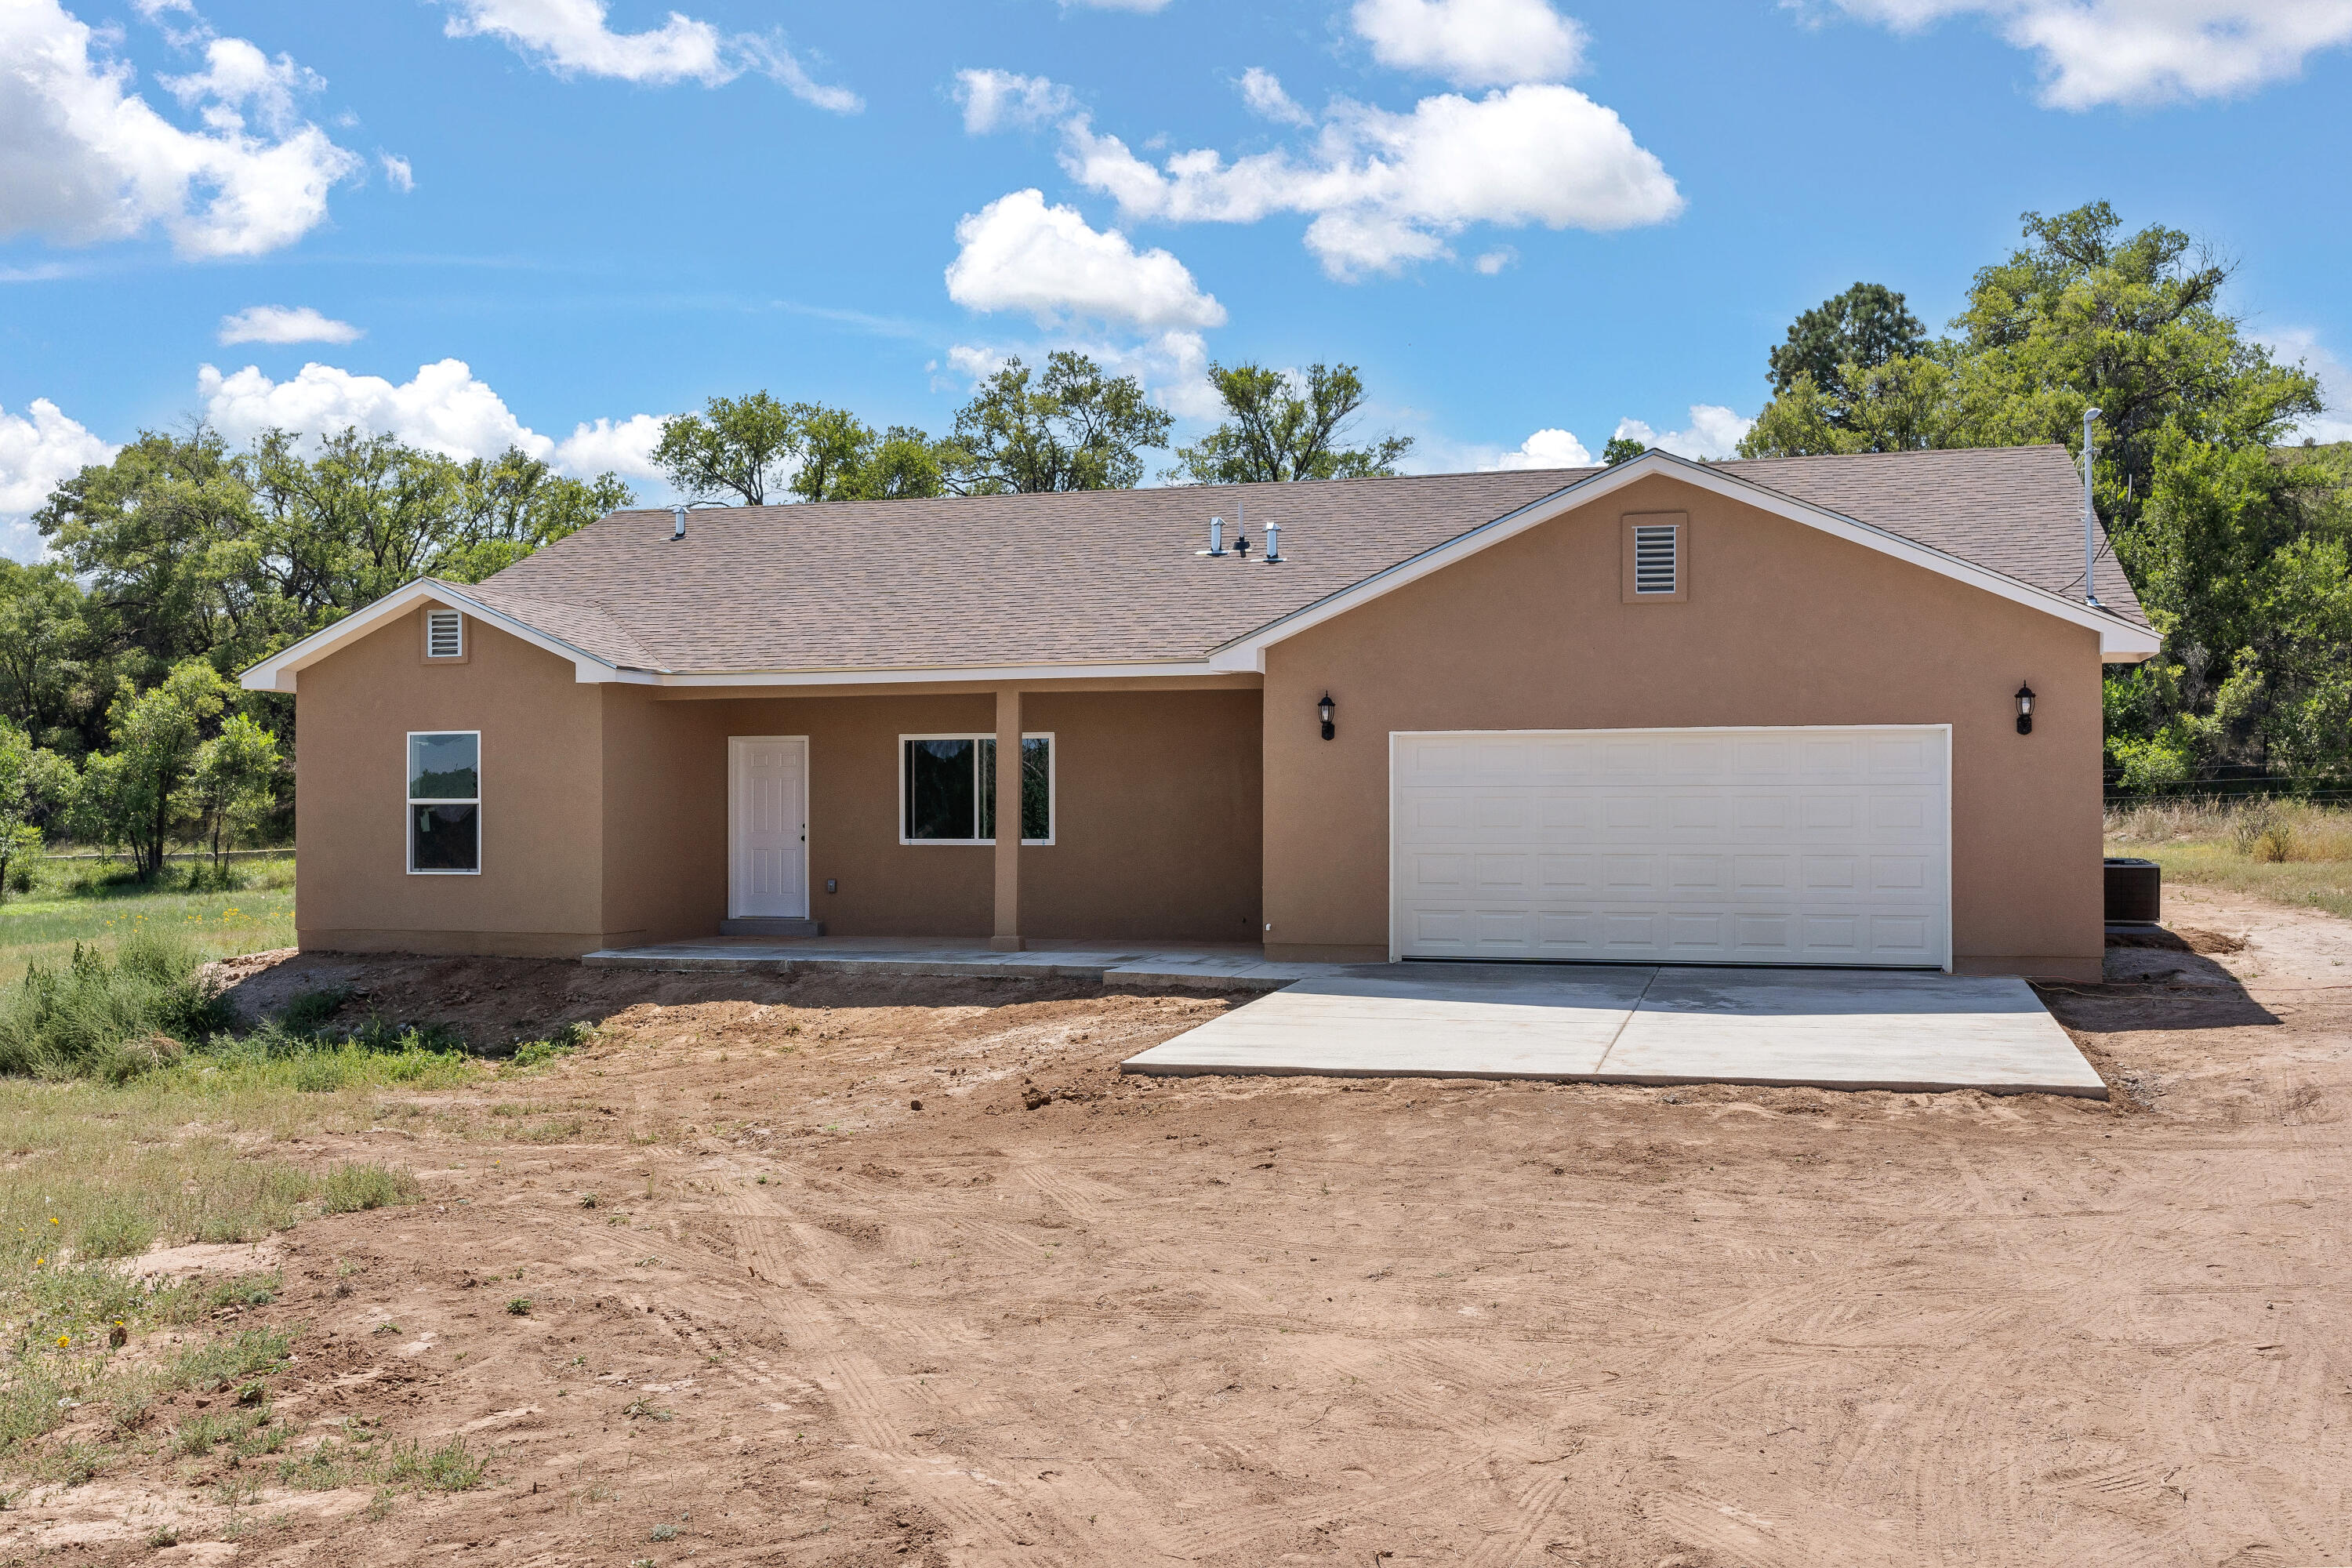 Builder occupied. $15,000 under appraised value! 2-acre horse property fenced and ready for your horses! Rare opportunity to own a new home without an HOA! Bring your horses! Here is a chance to pick up a brand-new home just minutes from Albuquerque at an affordable price!